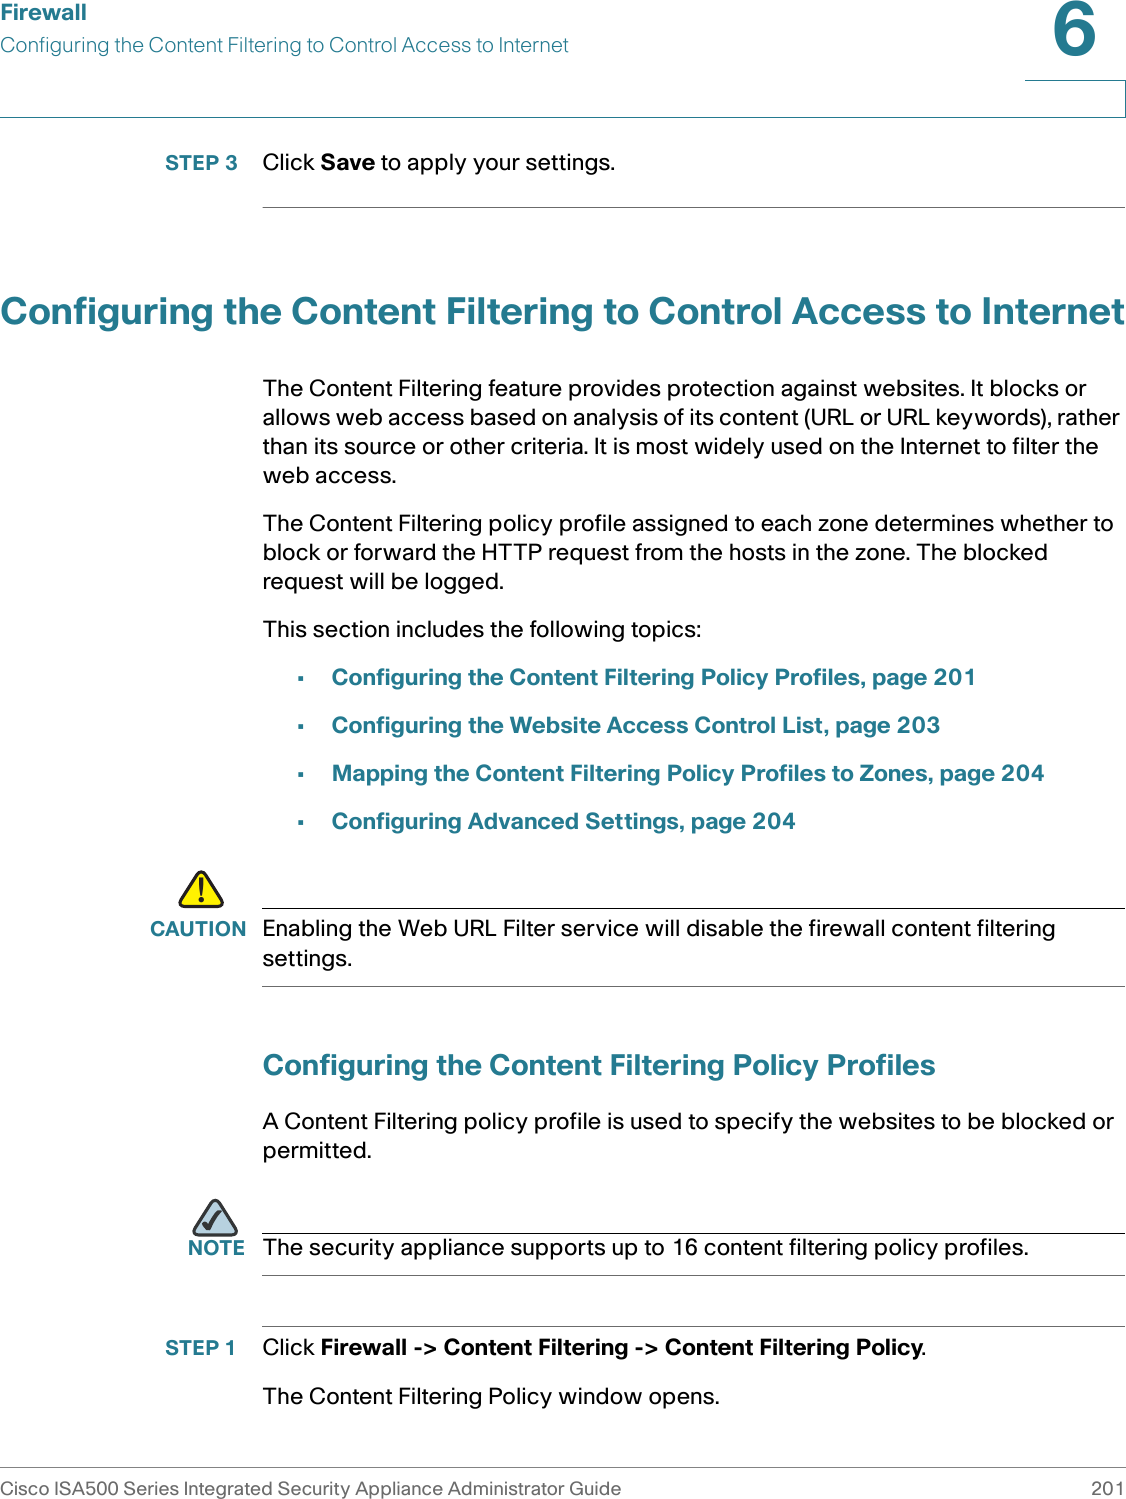 FirewallConfiguring the Content Filtering to Control Access to InternetCisco ISA500 Series Integrated Security Appliance Administrator Guide 2016 STEP 3 Click Save to apply your settings. Configuring the Content Filtering to Control Access to InternetThe Content Filtering feature provides protection against websites. It blocks or allows web access based on analysis of its content (URL or URL keywords), rather than its source or other criteria. It is most widely used on the Internet to filter the web access. The Content Filtering policy profile assigned to each zone determines whether to block or forward the HTTP request from the hosts in the zone. The blocked request will be logged. This section includes the following topics: •Configuring the Content Filtering Policy Profiles, page 201•Configuring the Website Access Control List, page 203•Mapping the Content Filtering Policy Profiles to Zones, page 204 •Configuring Advanced Settings, page 204!CAUTION Enabling the Web URL Filter service will disable the firewall content filtering settings. Configuring the Content Filtering Policy ProfilesA Content Filtering policy profile is used to specify the websites to be blocked or permitted. NOTE The security appliance supports up to 16 content filtering policy profiles. STEP 1 Click Firewall -&gt; Content Filtering -&gt; Content Filtering Policy. The Content Filtering Policy window opens. 